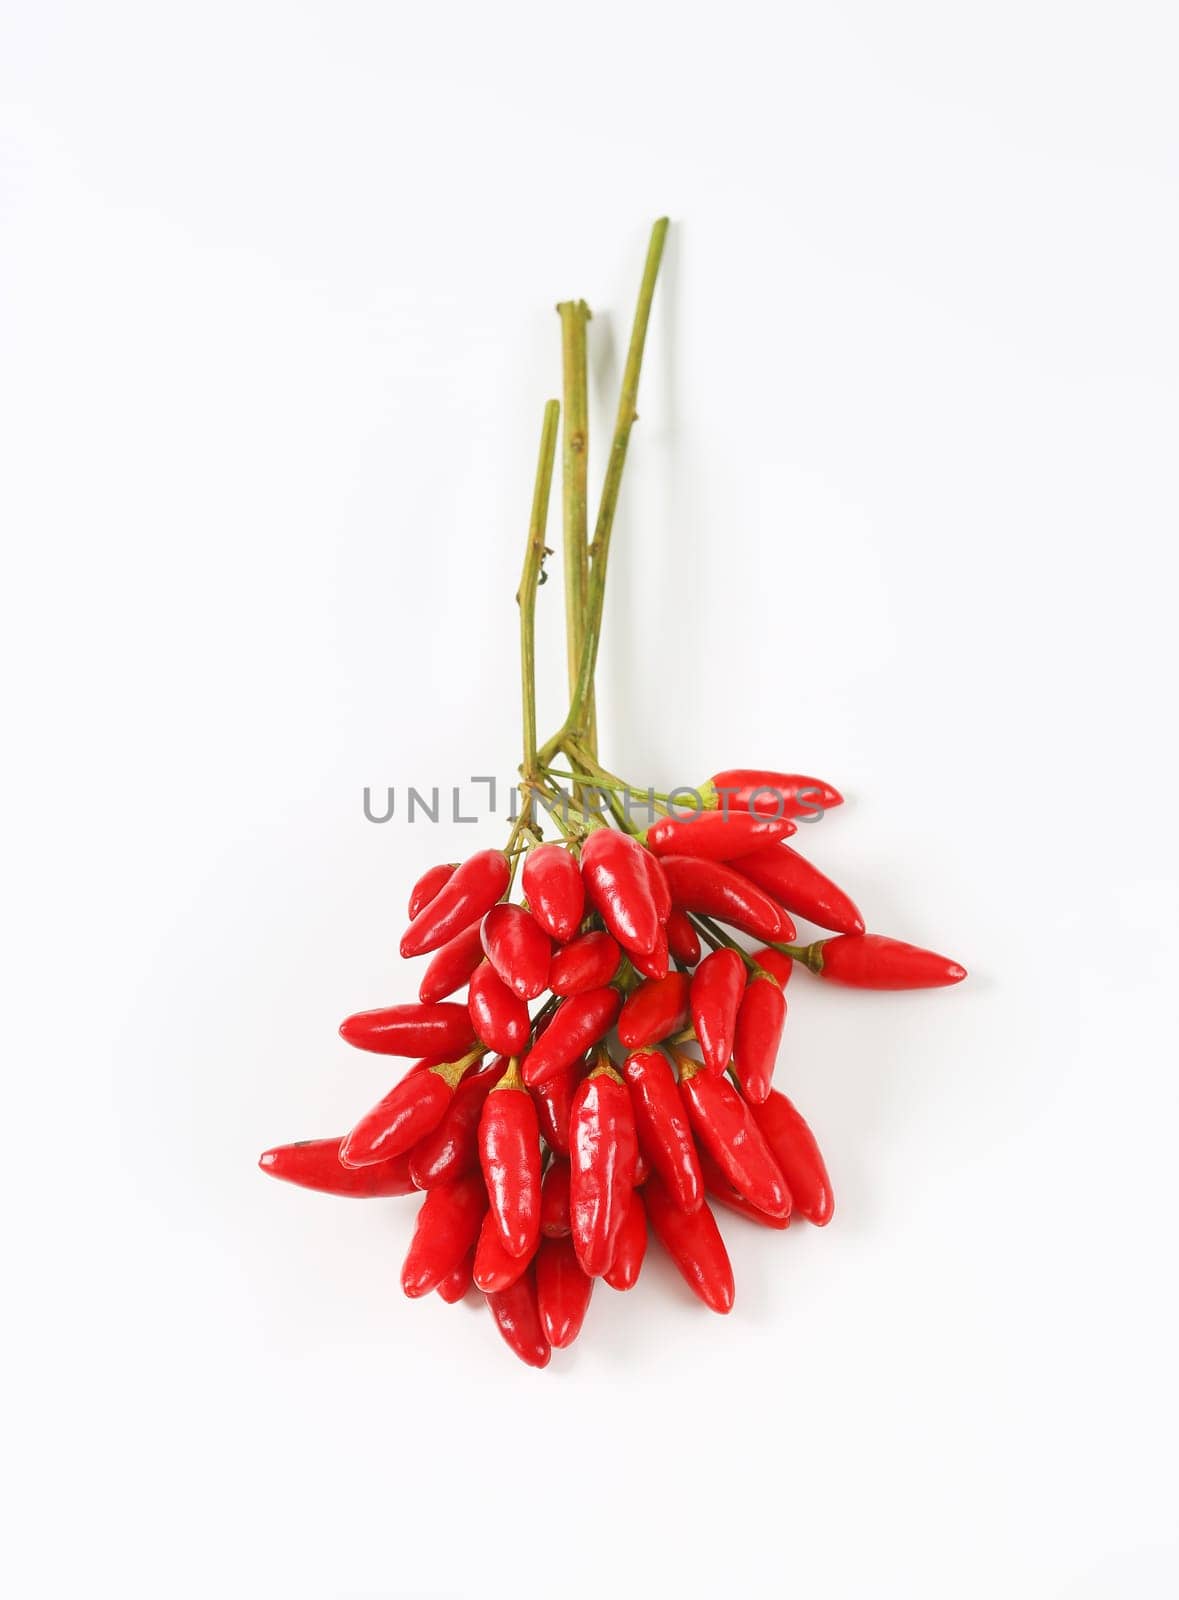 Red chili peppers by Digifoodstock